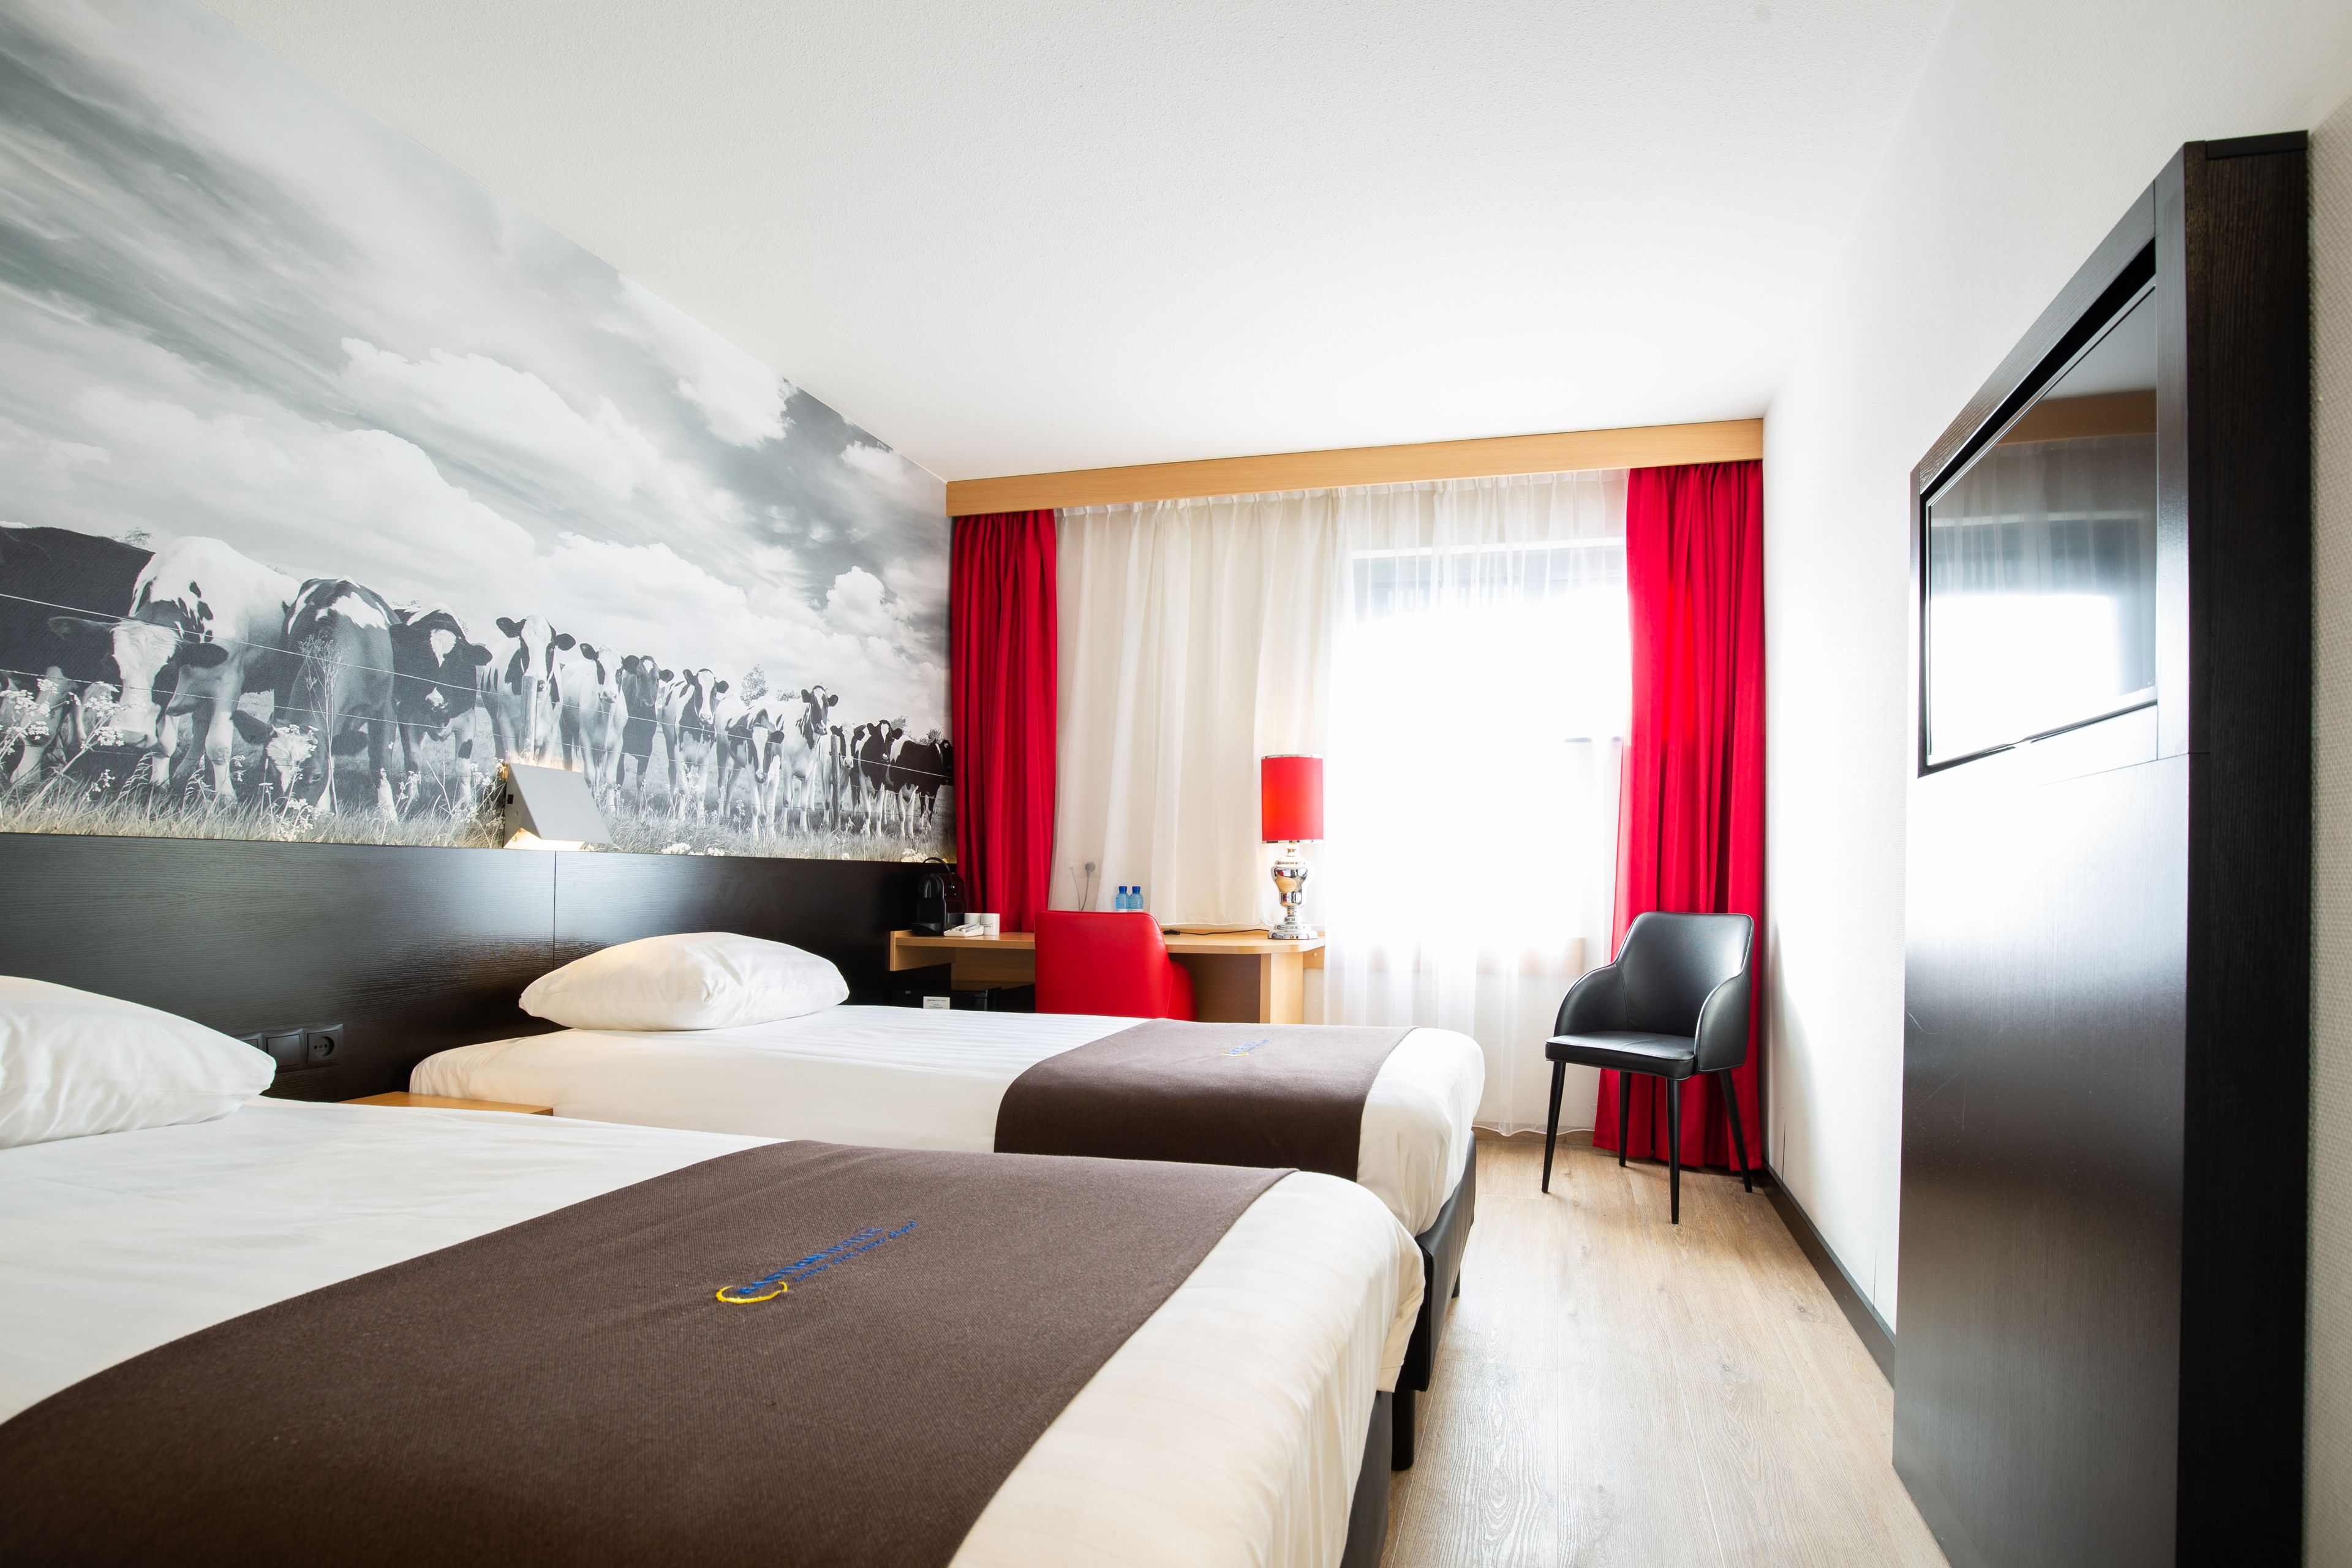 Bastion Hotel Zoetermeer <br/>64.00 ew <br/> <a href='http://vakantieoplossing.nl/outpage/?id=0f793539b95d93207372c4f23c4ea541' target='_blank'>View Details</a>